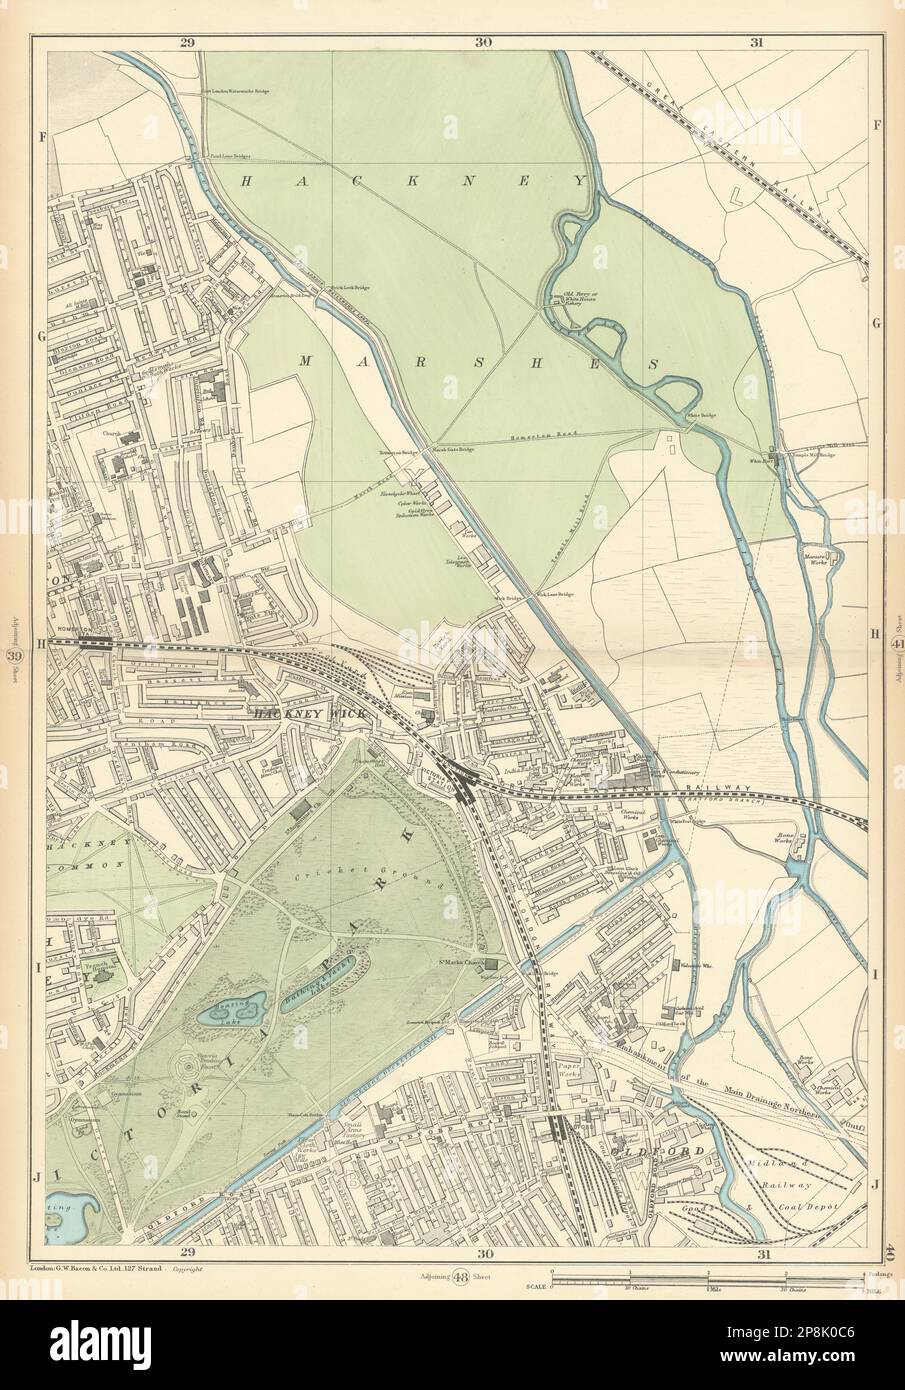 HACKNEY WICK/Marshes Victoria Park Old Ford Homerton Clapton Leyton 1900 map Stock Photo